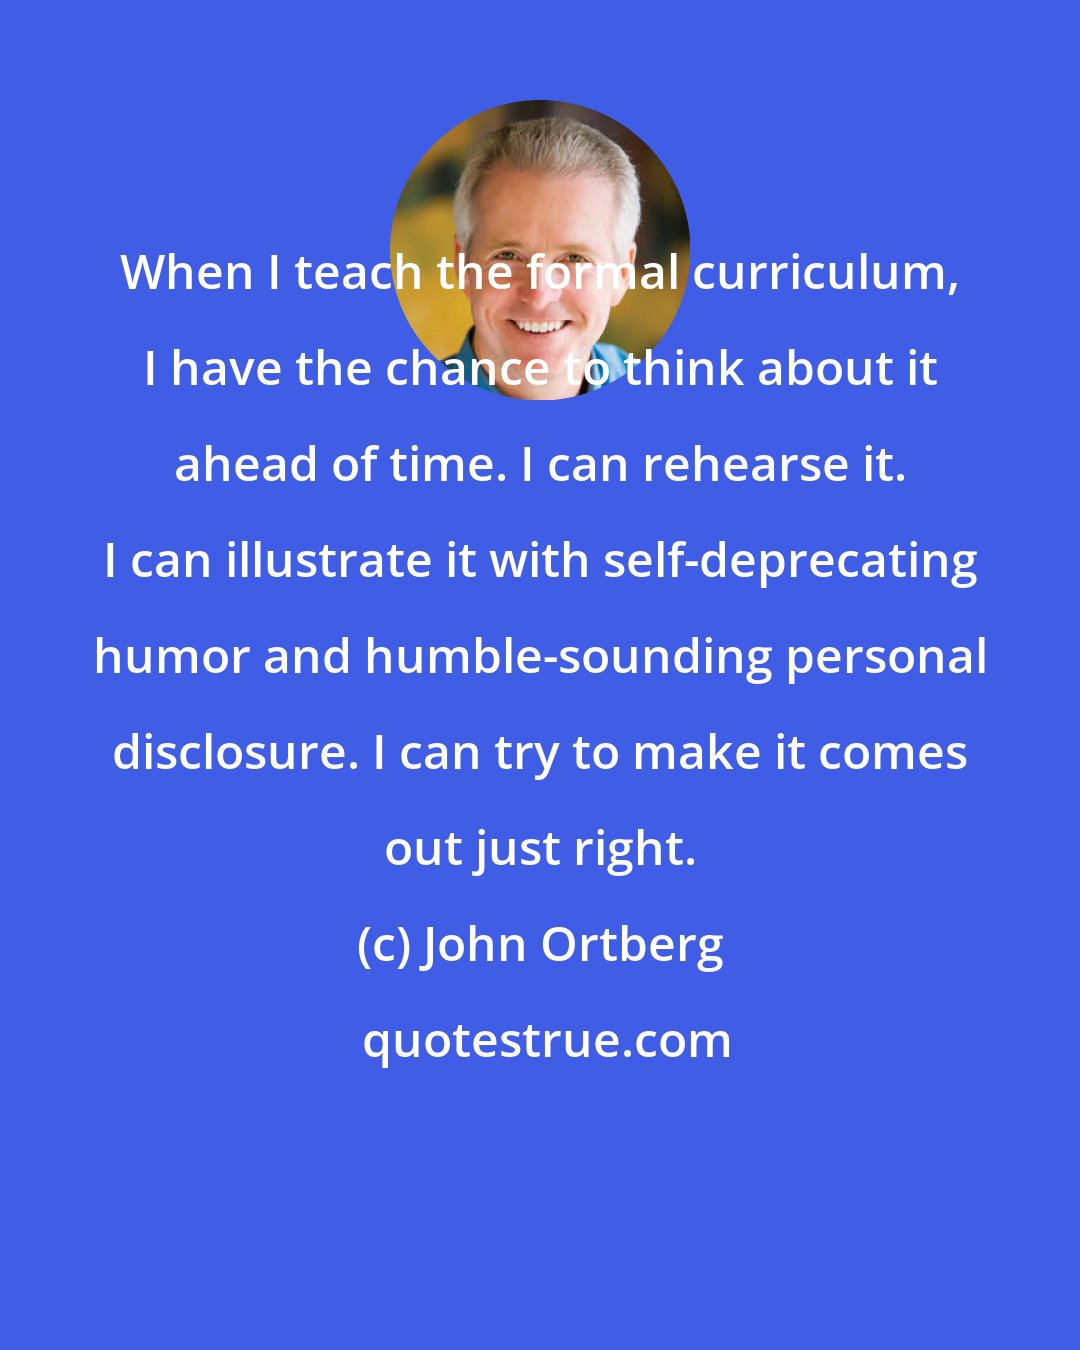 John Ortberg: When I teach the formal curriculum, I have the chance to think about it ahead of time. I can rehearse it. I can illustrate it with self-deprecating humor and humble-sounding personal disclosure. I can try to make it comes out just right.